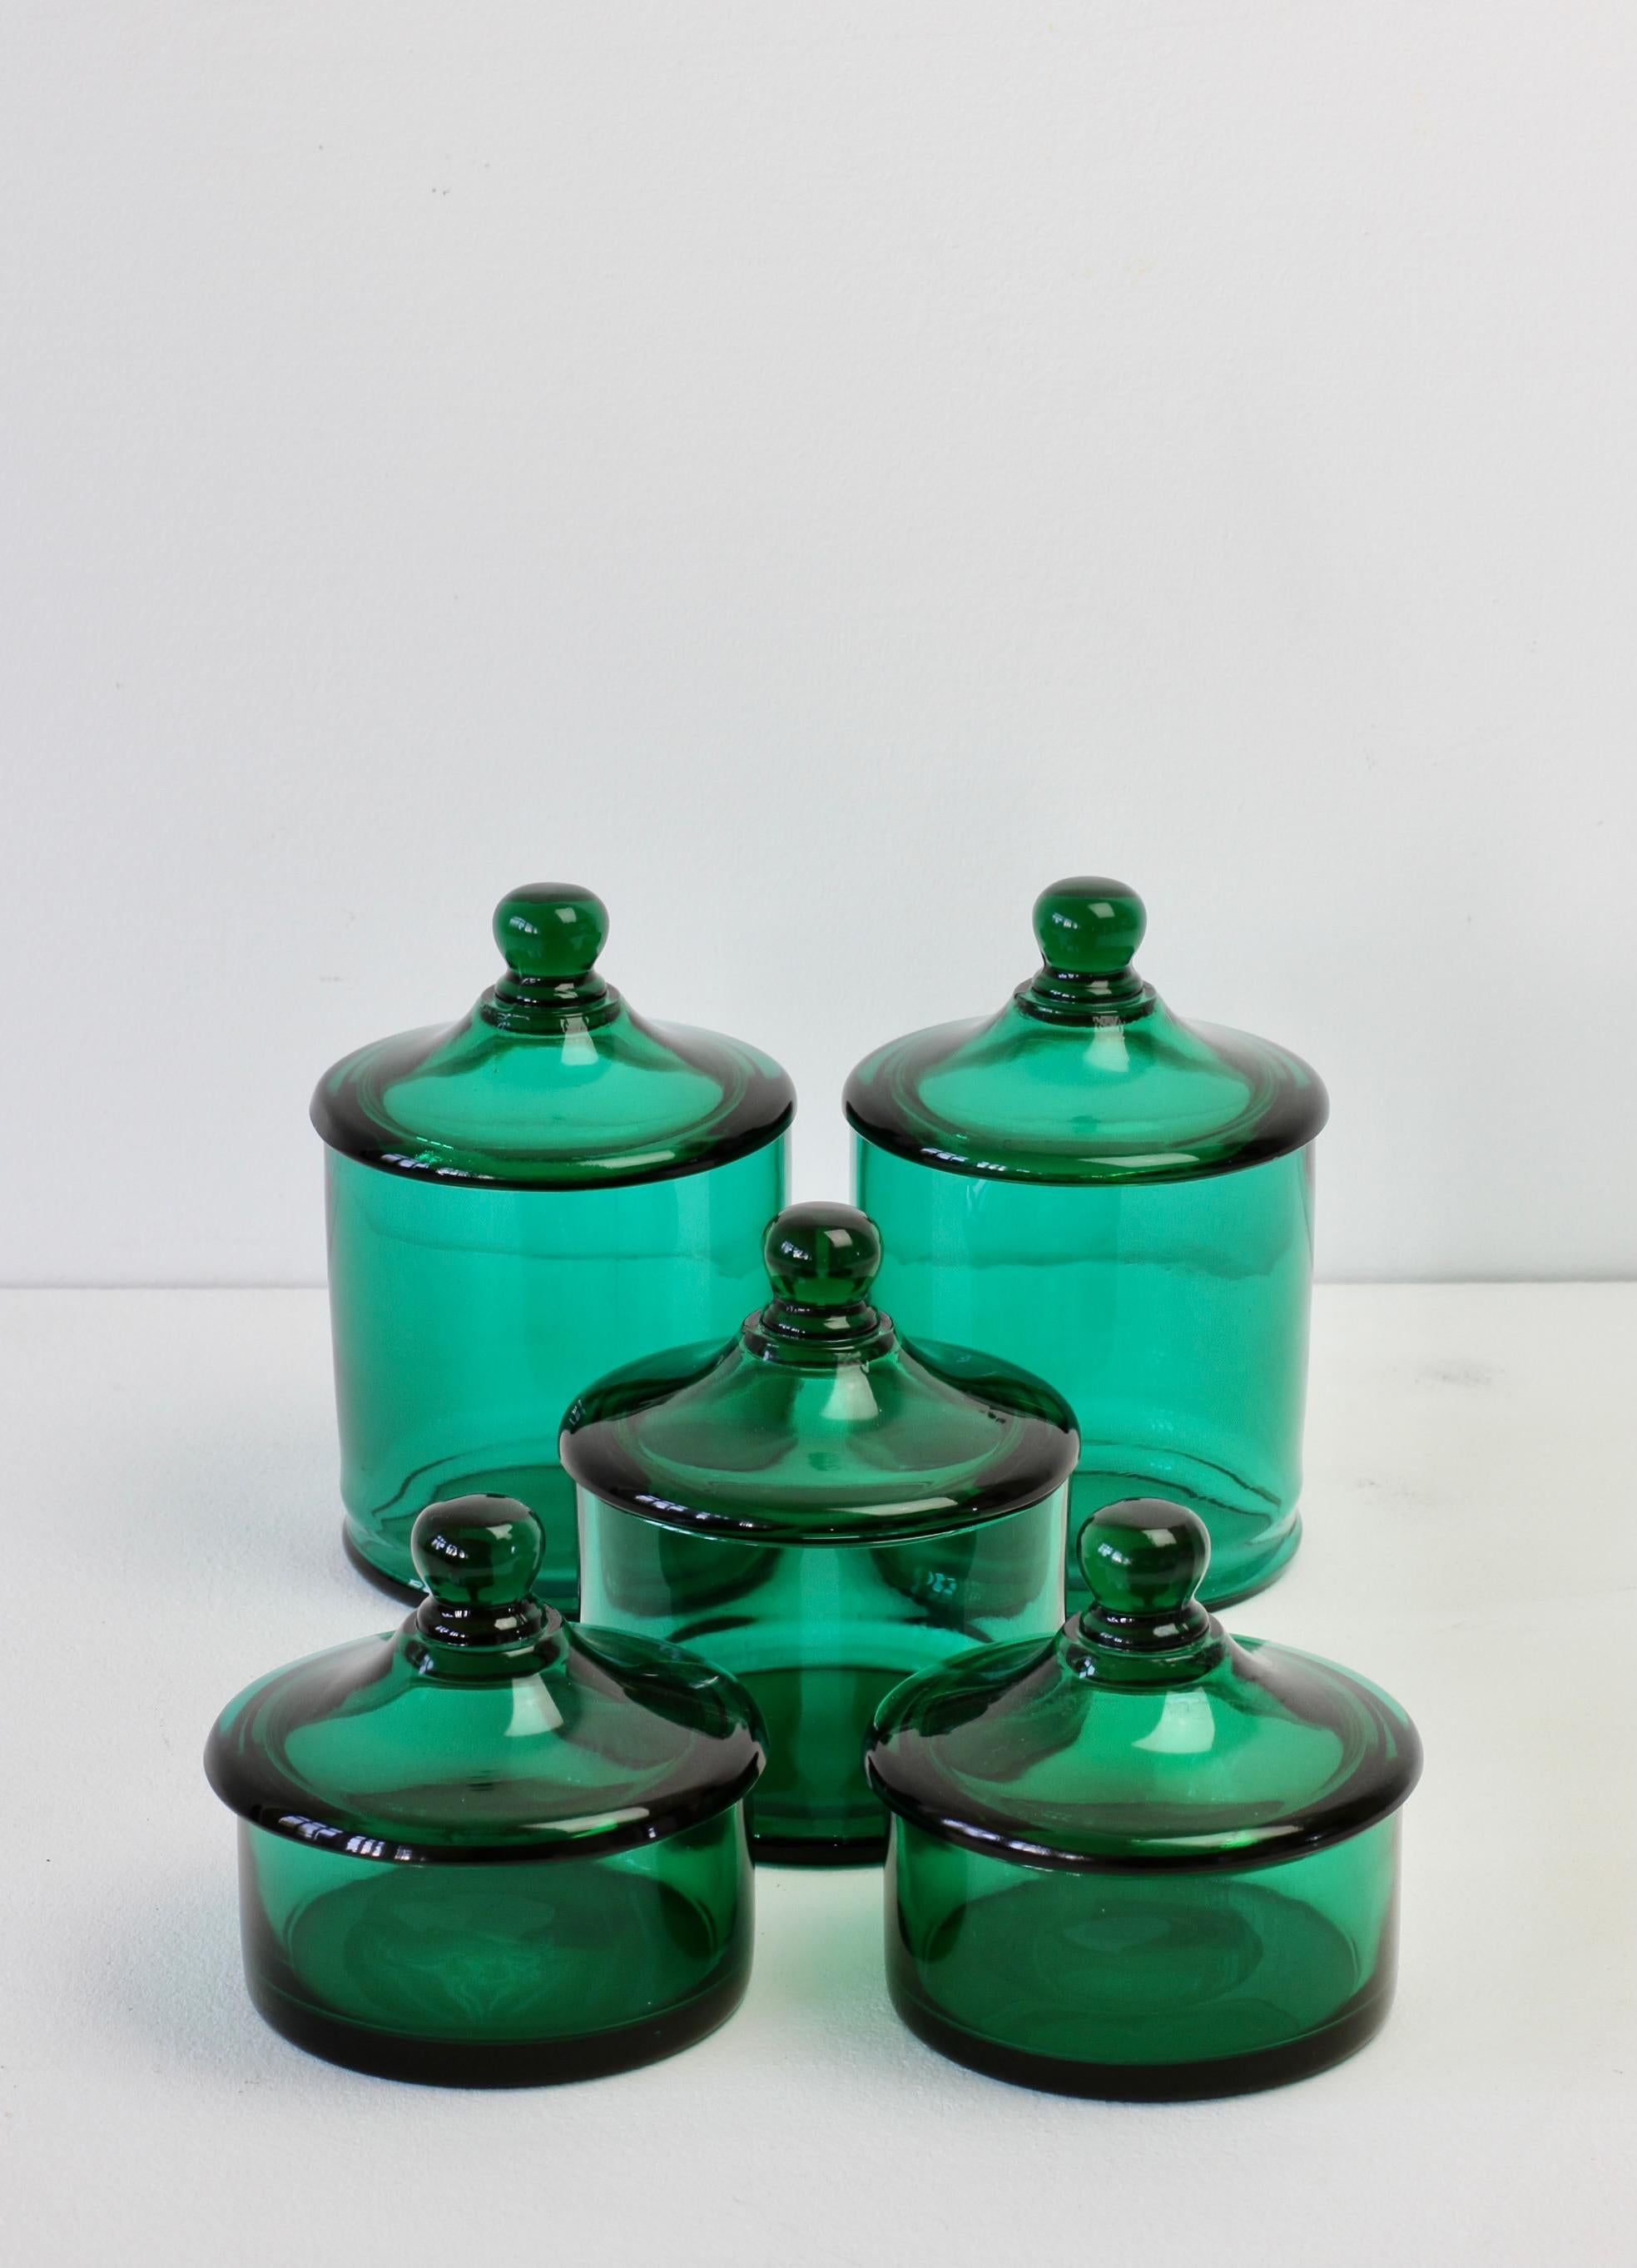 Rare set of five Venetian Murano green colored / coloured glass Apothecary jars or urns with lids. Wonderful vintage Mid-Century Italian glass and perfect for the storage sweets or snacks in the kitchen or for cotton wool buds or cosmetics in a